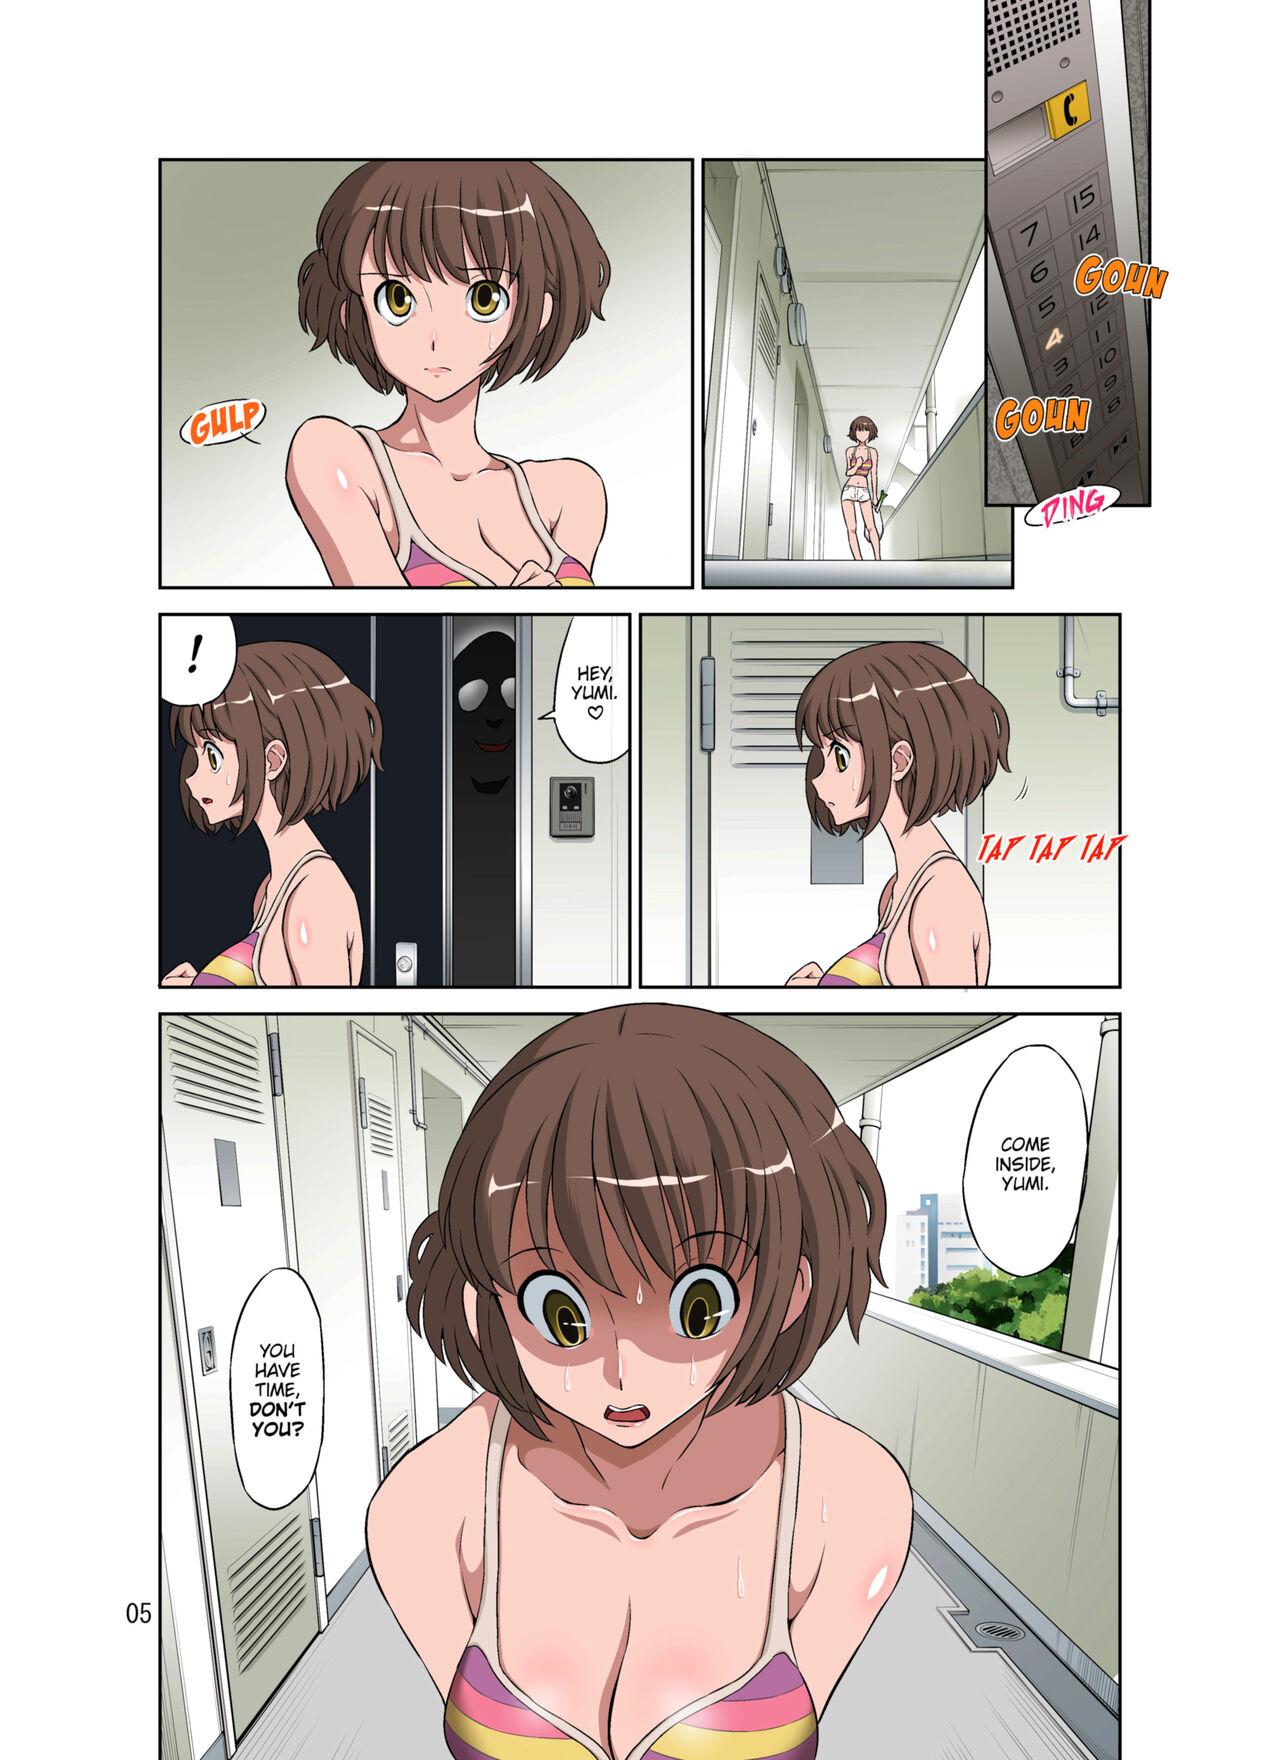 Rough Sex Stealing the Energetic Mom + Tanned Version - Original Rimming - Page 5